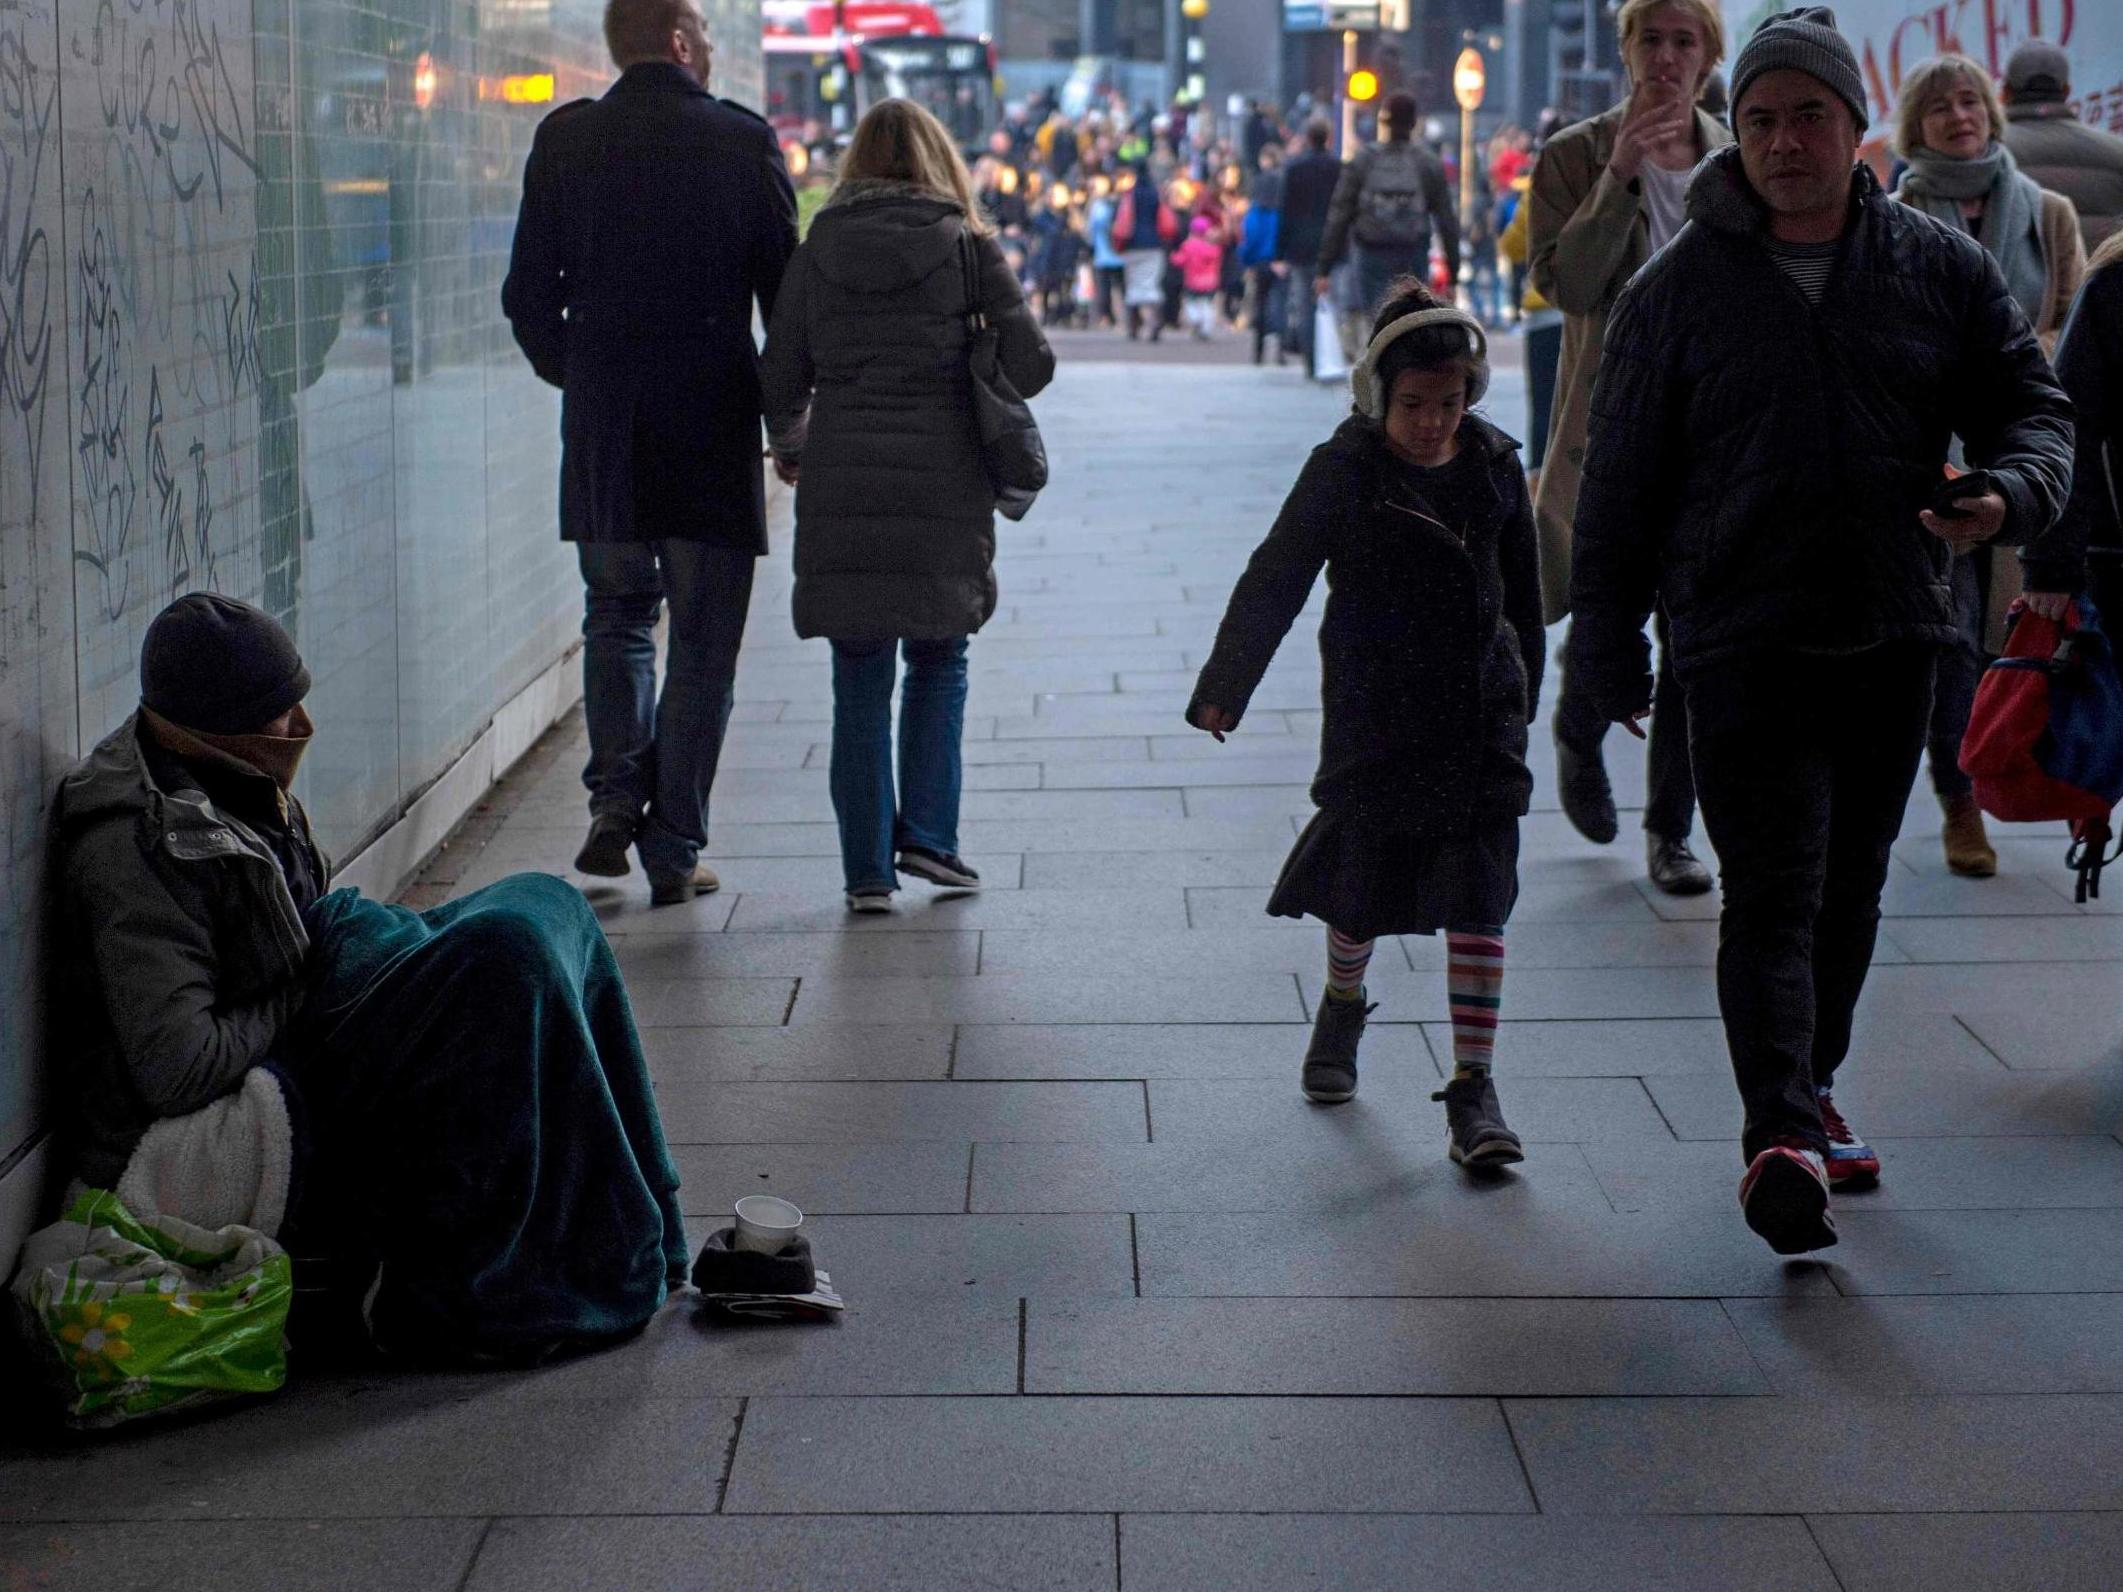 The homelessness crisis shows little sign of exacerbating